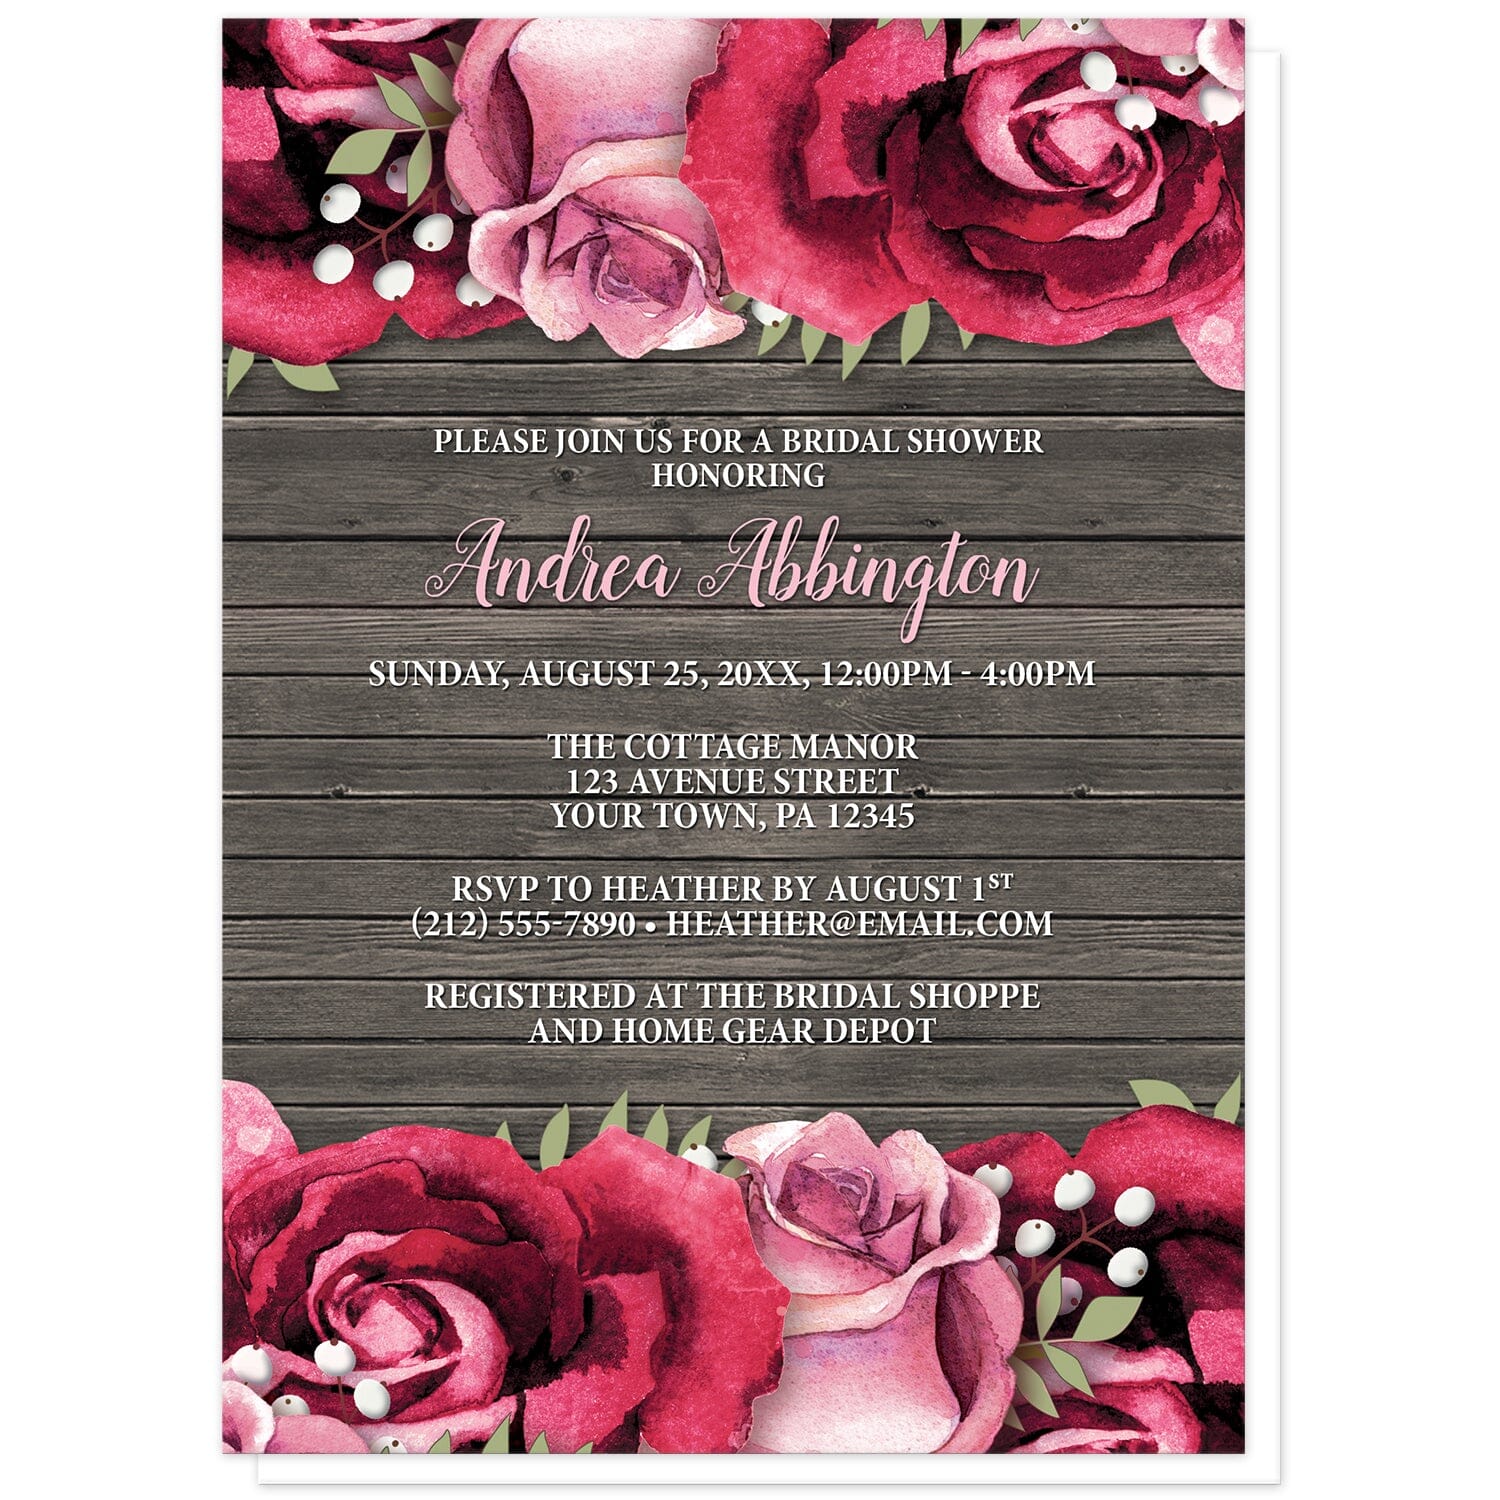 Rustic Burgundy Pink Rose Wood Bridal Shower Invitations at Artistically Invited. Rustic burgundy pink rose wood bridal shower invitations with beautiful burgundy red and pink roses along the top and bottom over a brown wood background design. Your personalized bridal shower celebration details are custom printed in pink and white over the rustic wood background in the center between the roses.